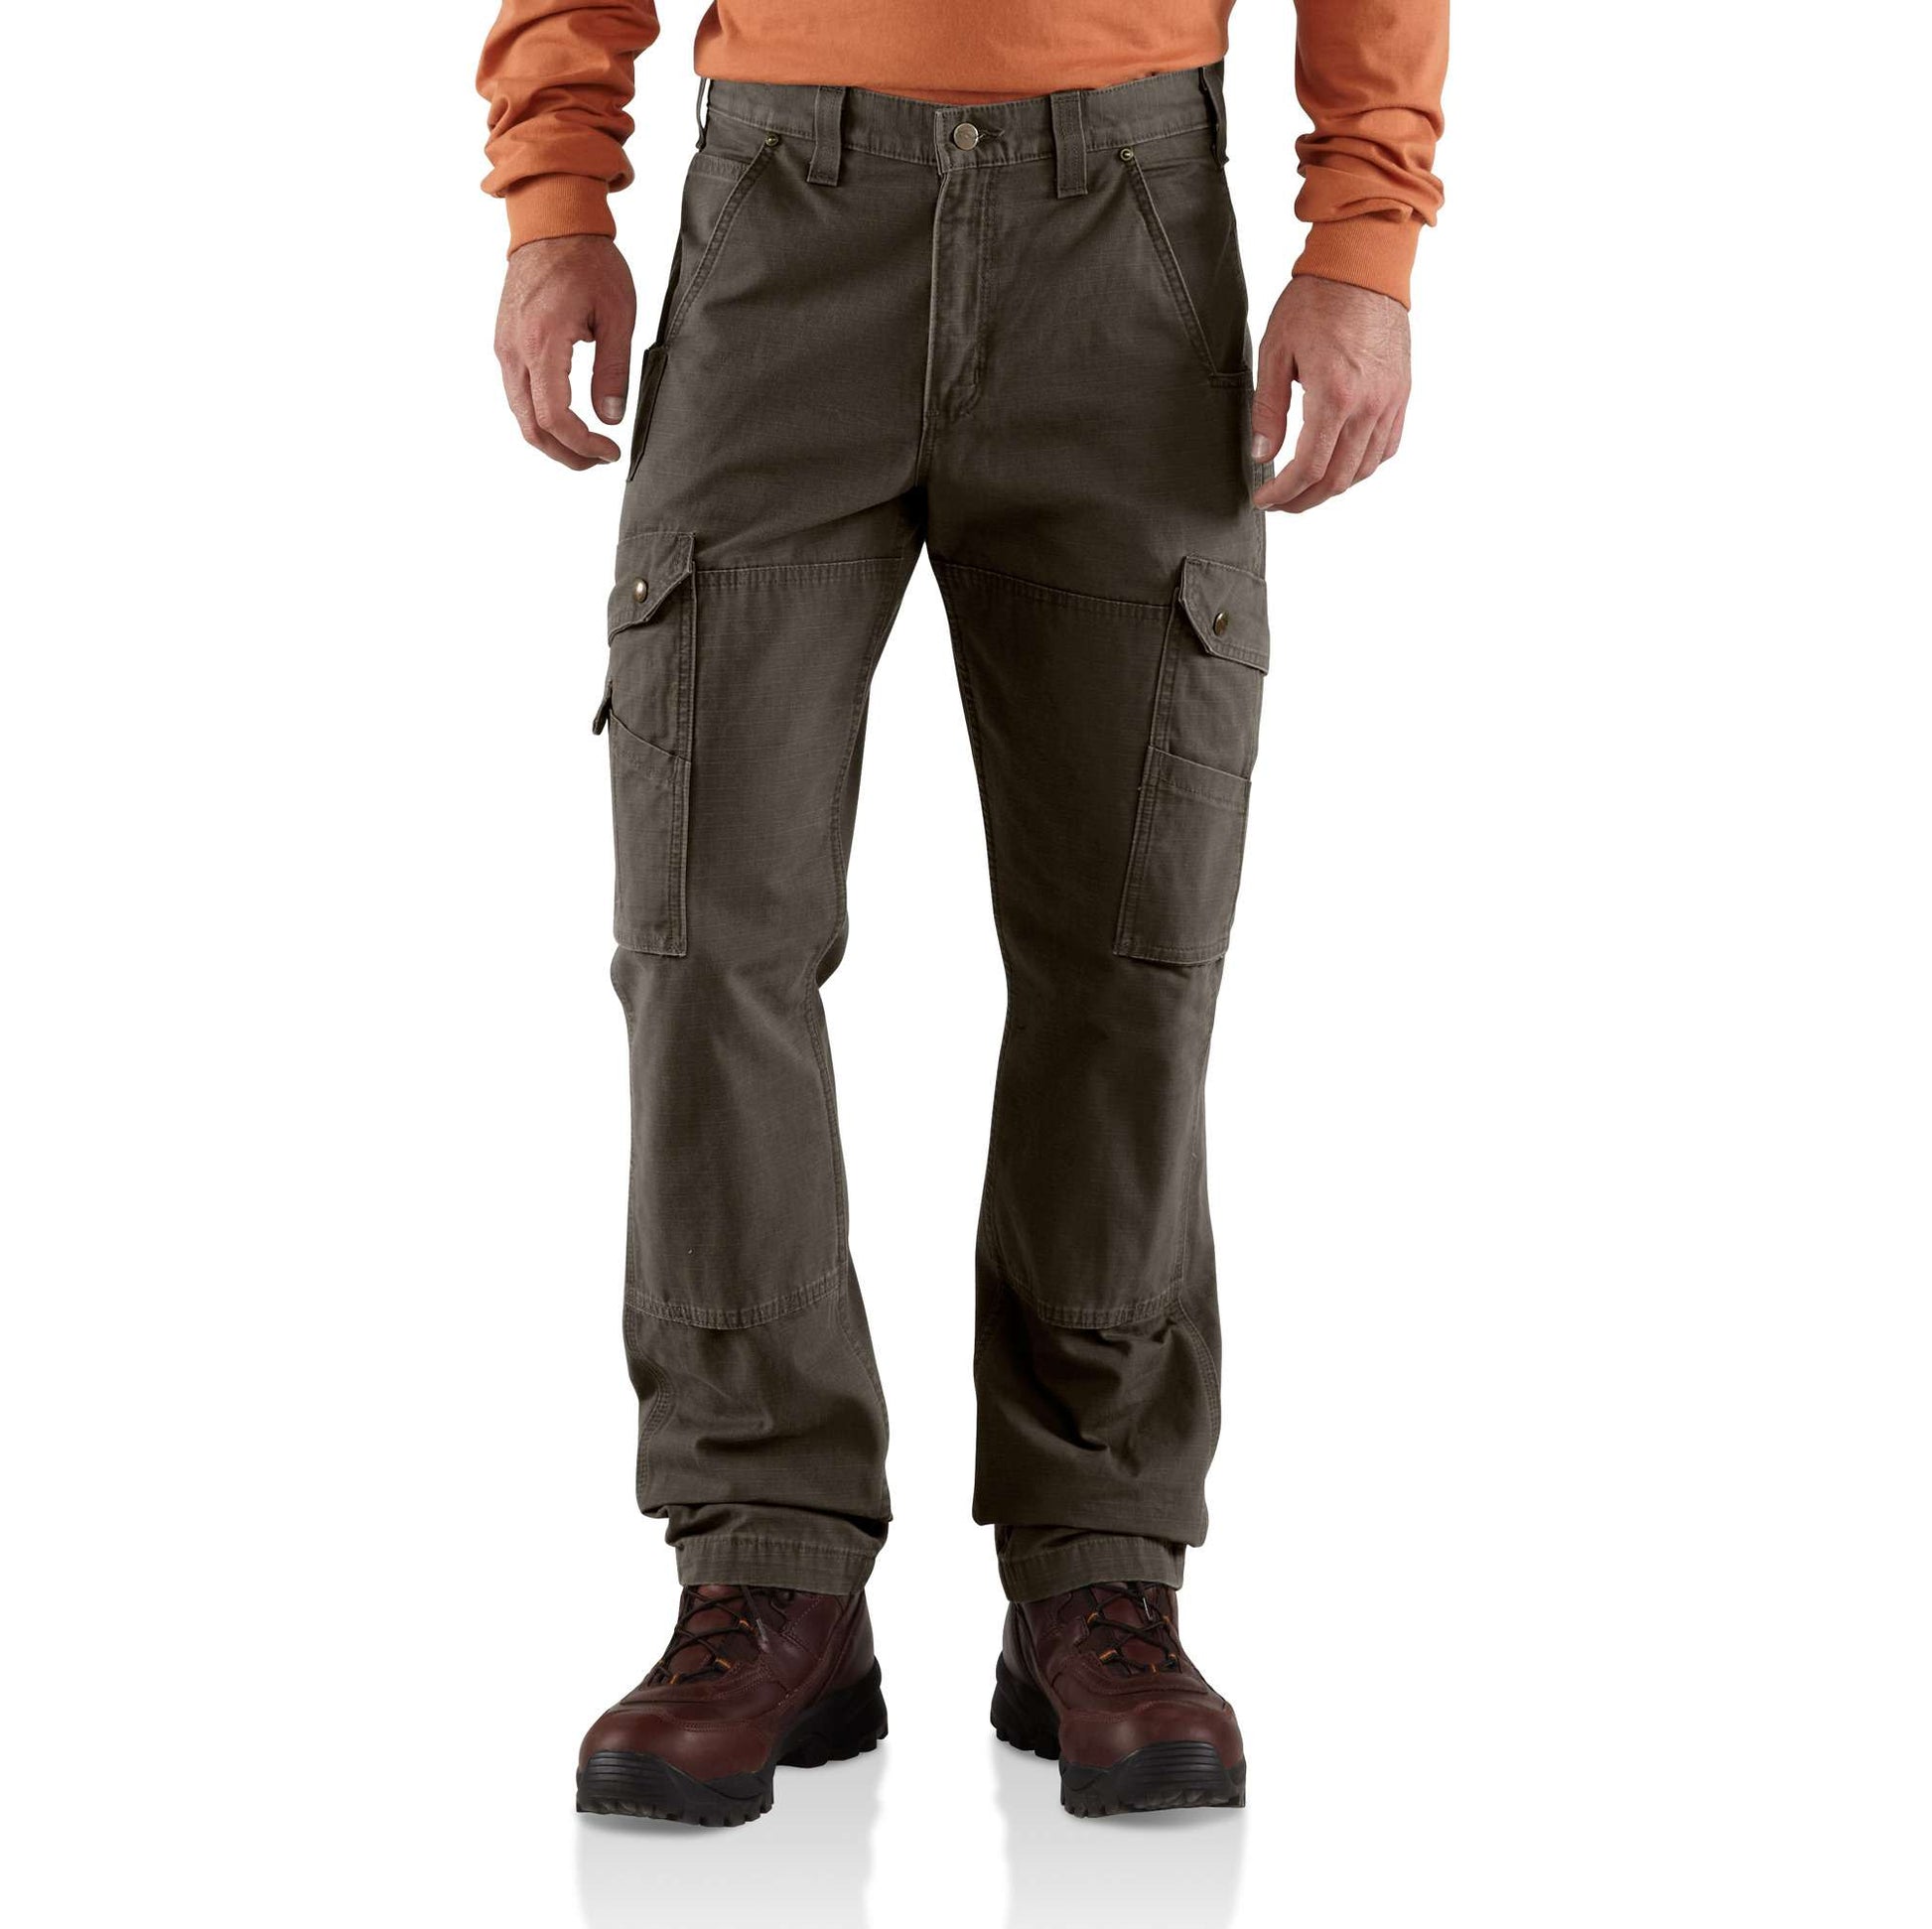 Big & Tall Wrangler Relaxed-Fit Ripstop Cargo Pants